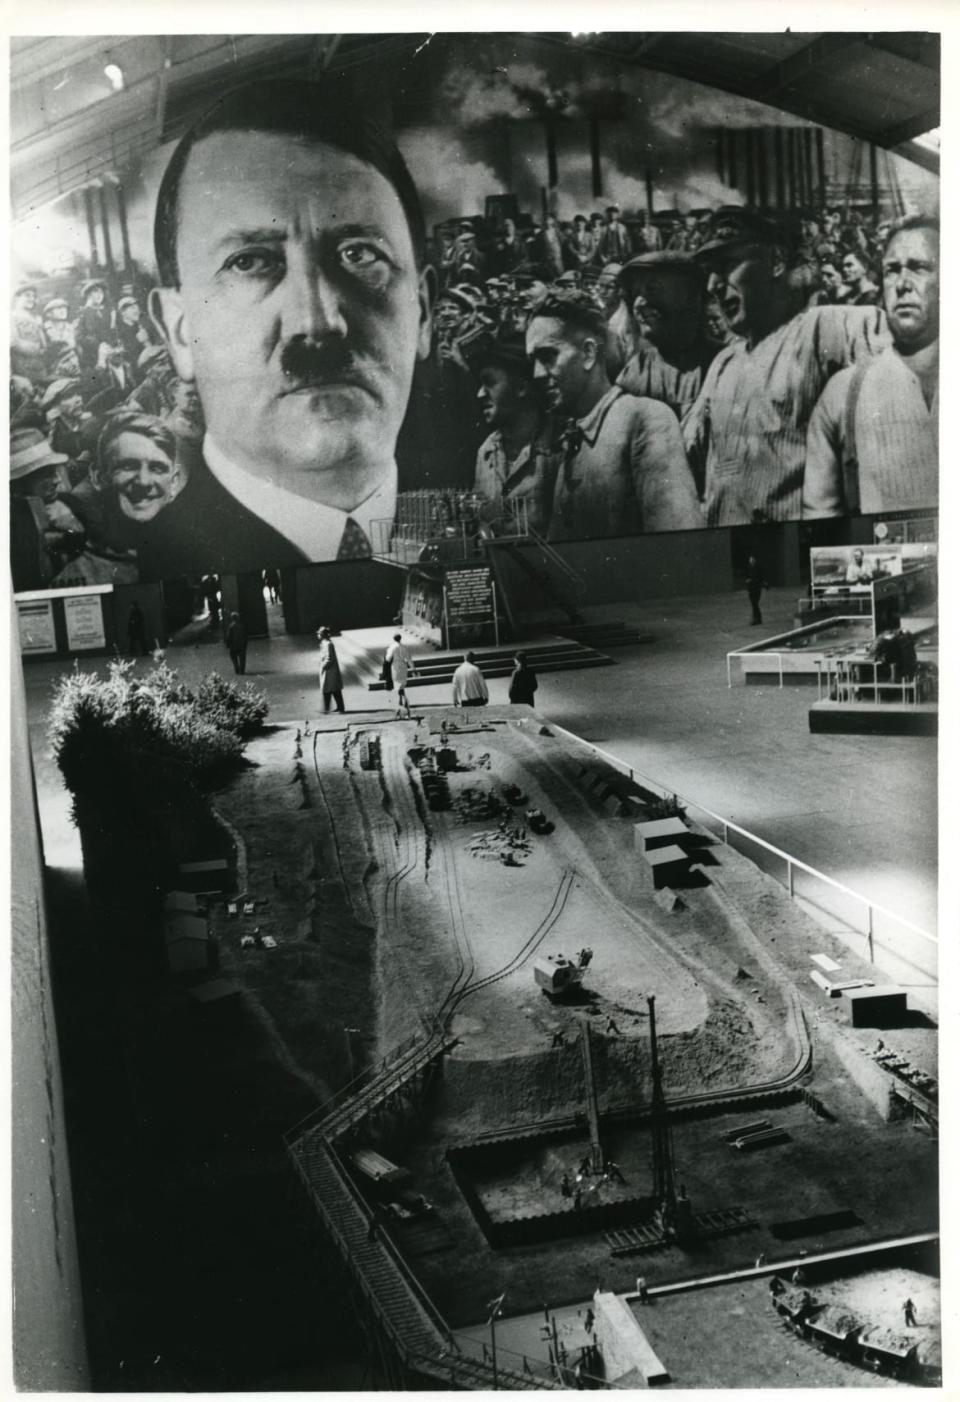 <div class="inline-image__caption"><p><i>Give Me Four Years’ Time</i>! Mining model beneath Hitler mural; people viewing, 1937.</p></div> <div class="inline-image__credit">Courtesy Dittrick Medical History Center, Case Western Reserve University. </div>